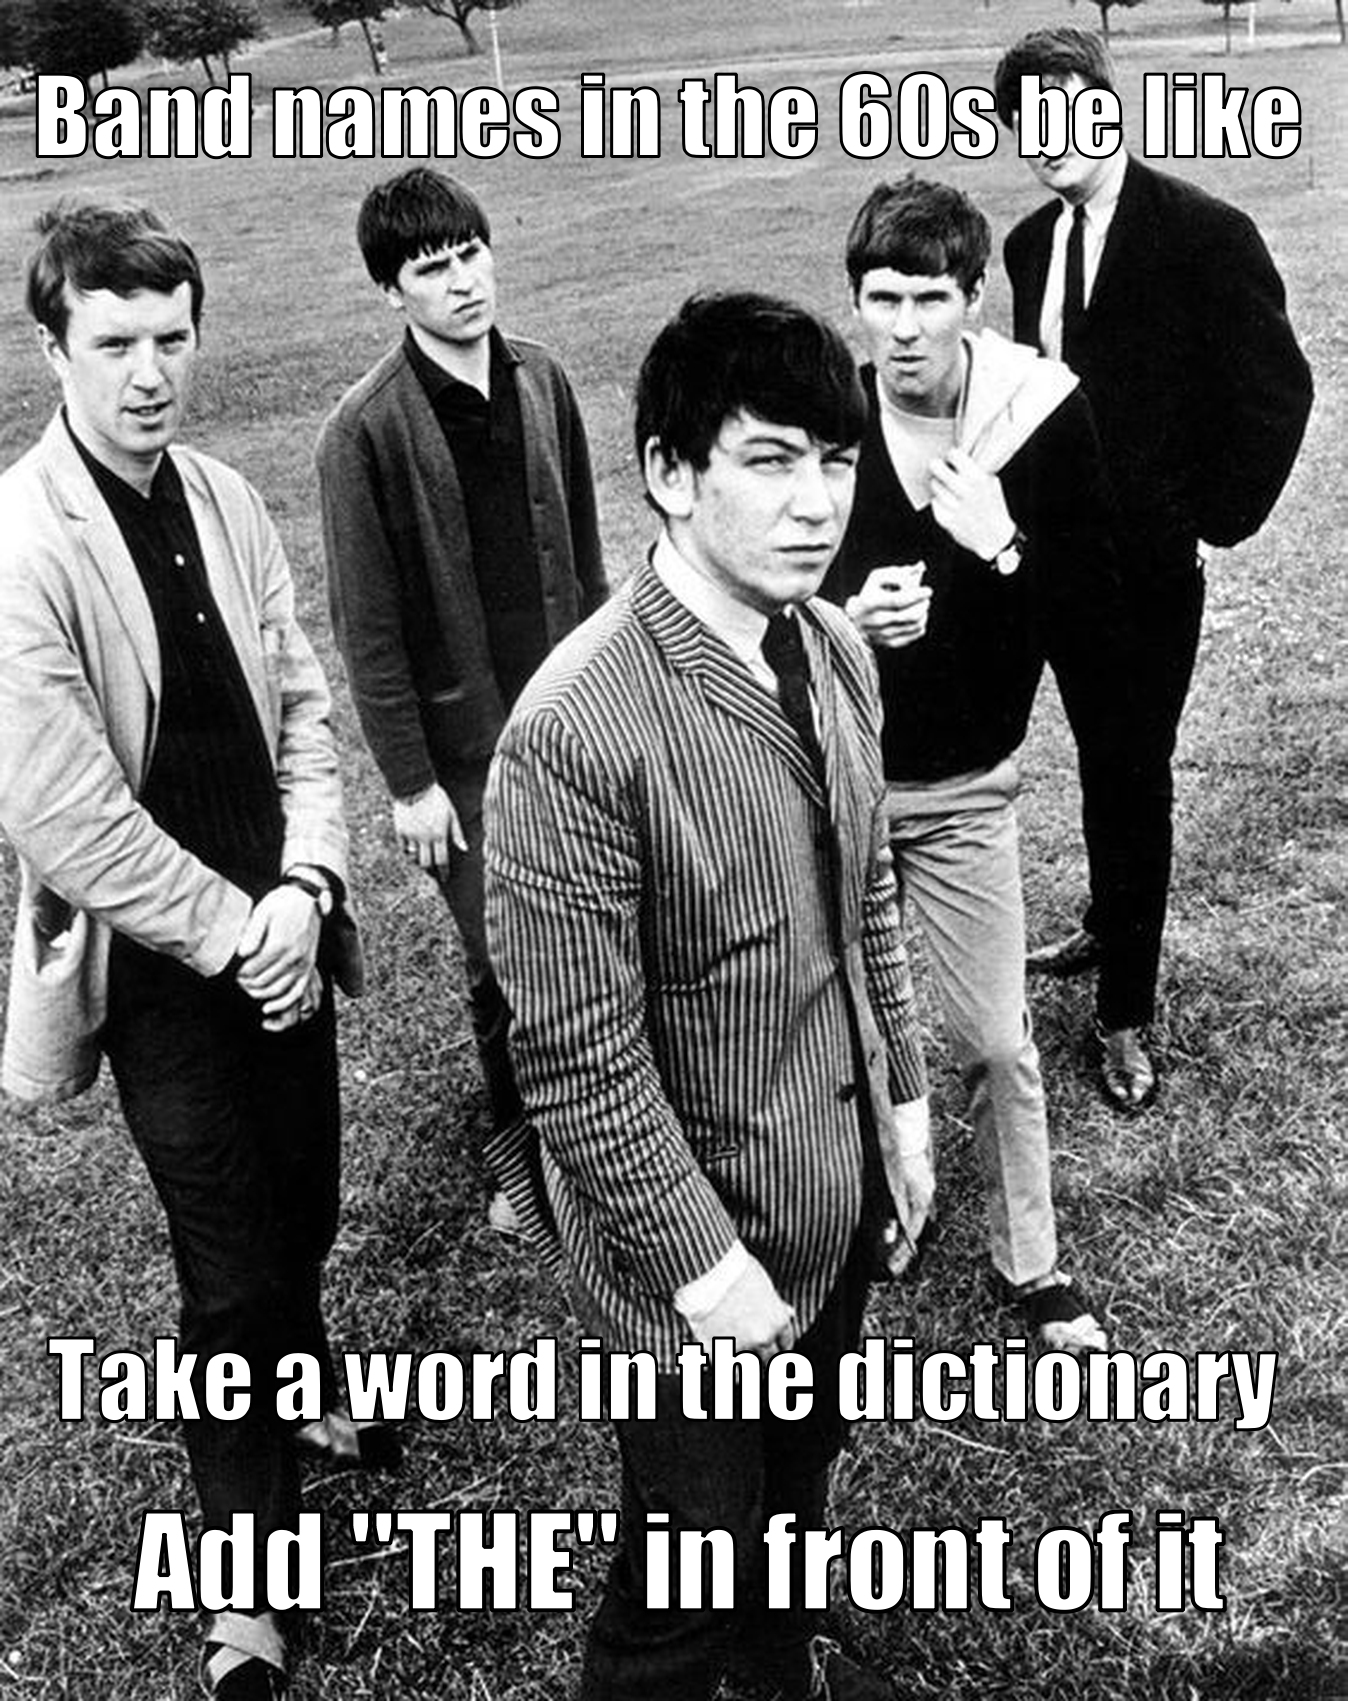 funny memes - animals retrospective - Band names in the 60s be 9 Take a word in the dictionary Add "The" in front of it